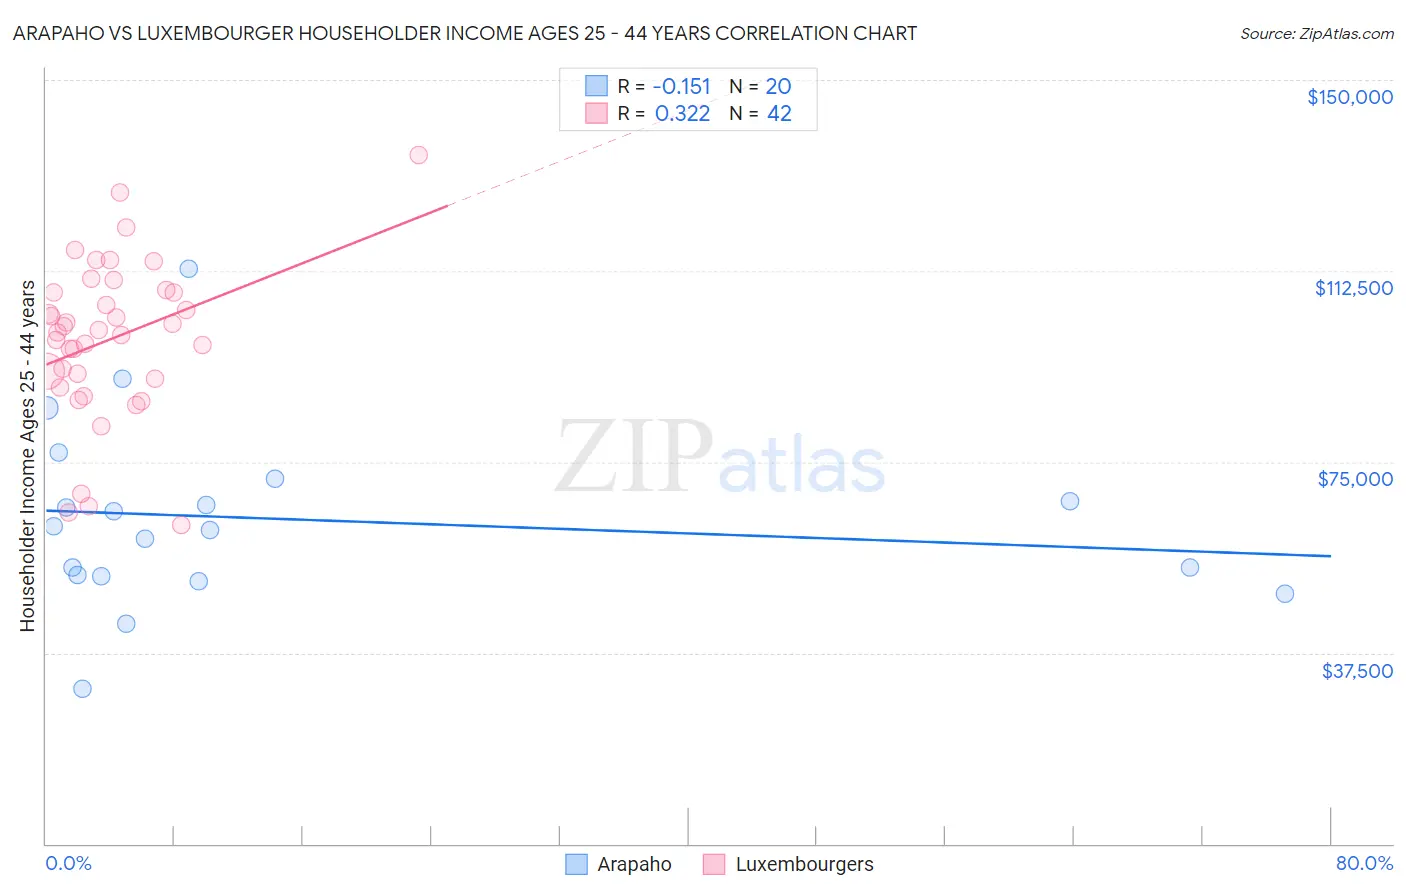 Arapaho vs Luxembourger Householder Income Ages 25 - 44 years